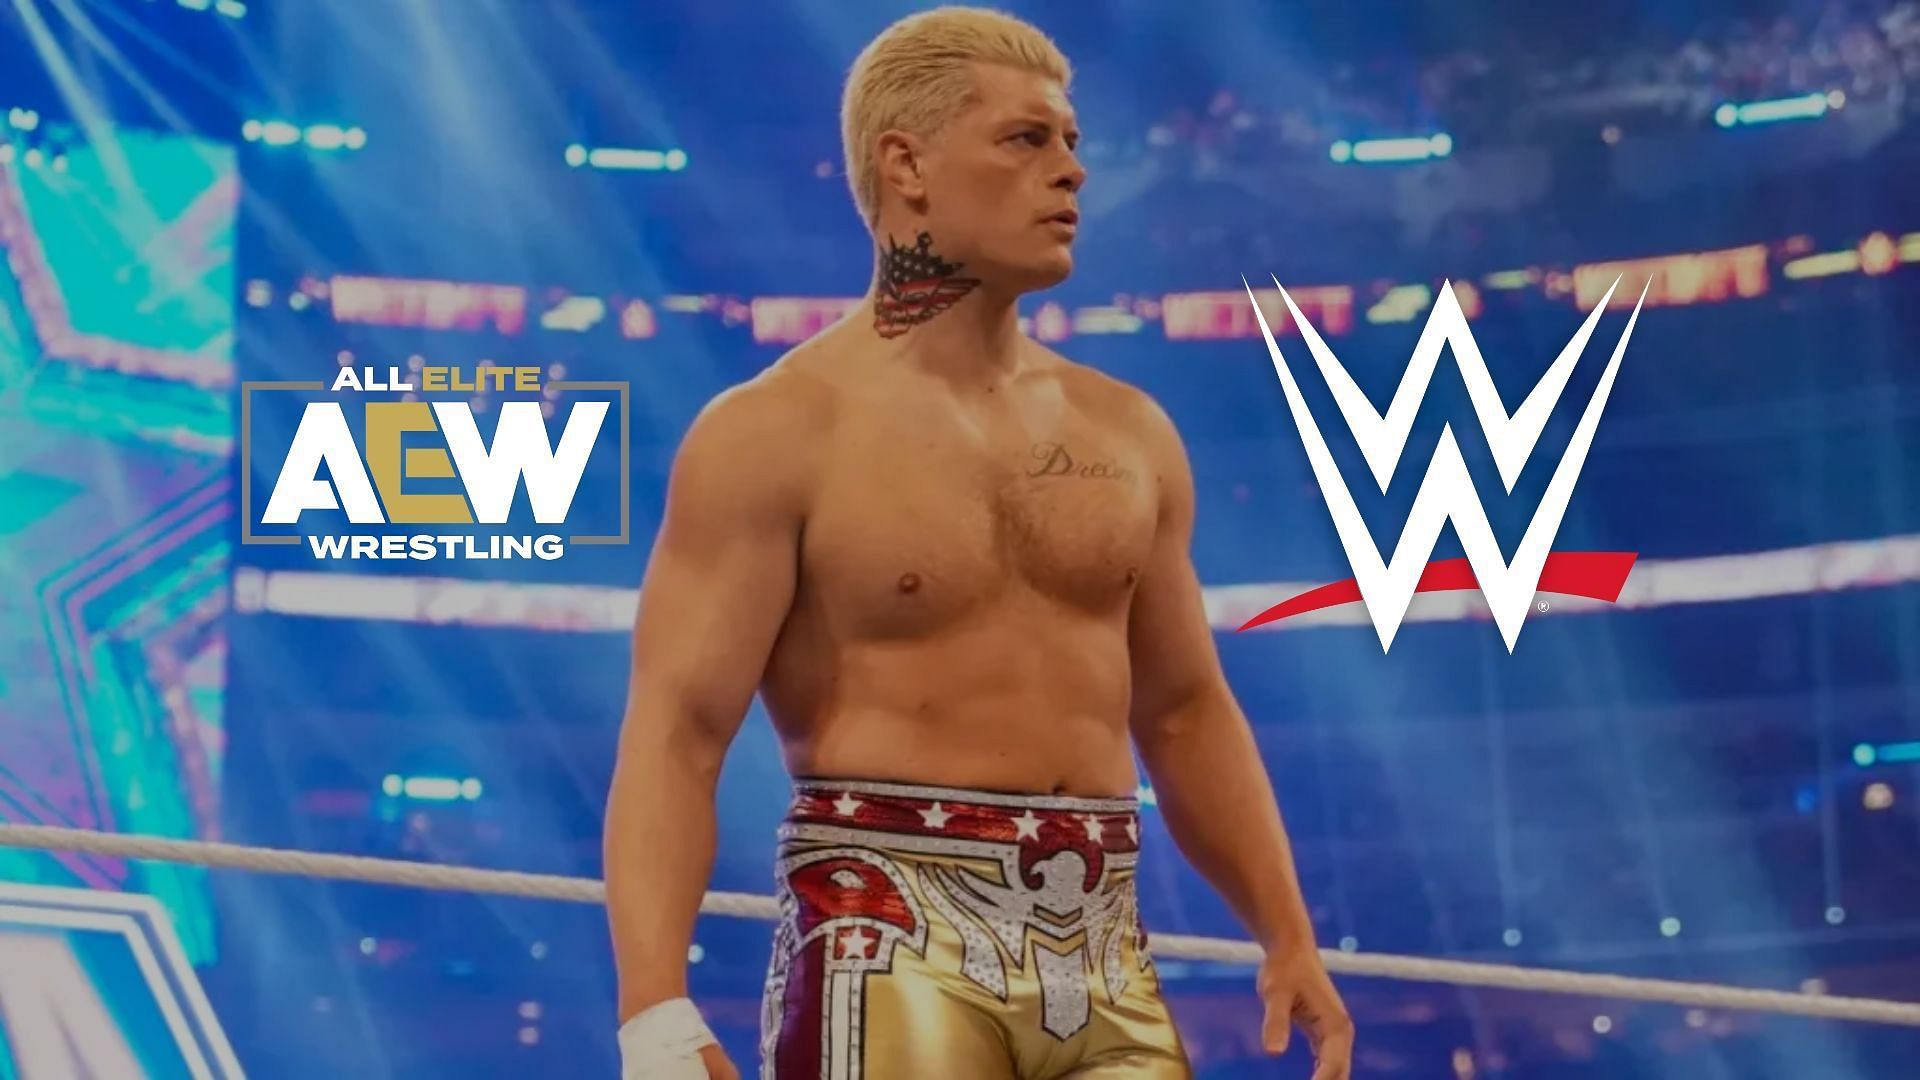 Leaving AEW was the &quot;easiest thing&quot; he ever did, claims WWE Superstar Cody Rhodes